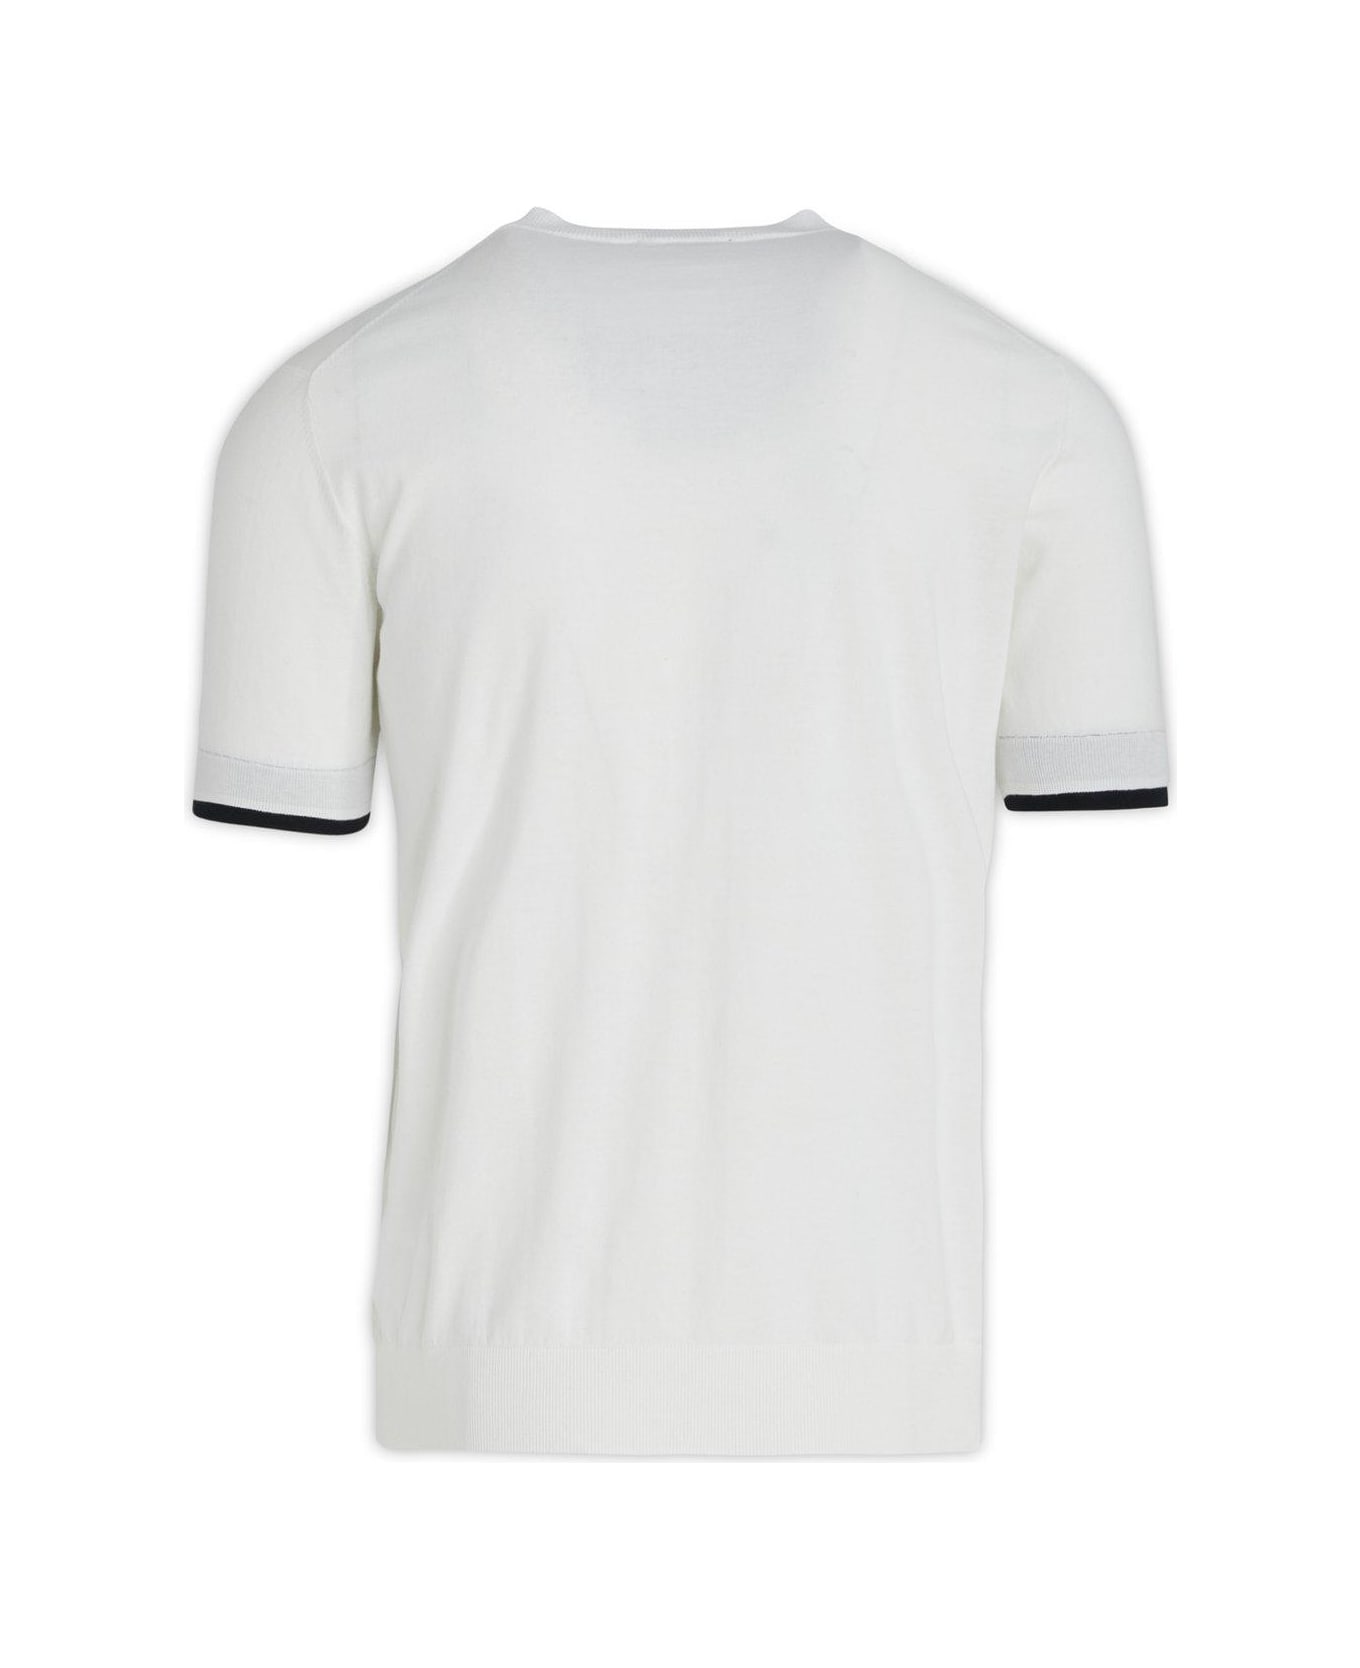 Paolo Pecora Short-sleeved Knitted T-shirt - Bianco シャツ